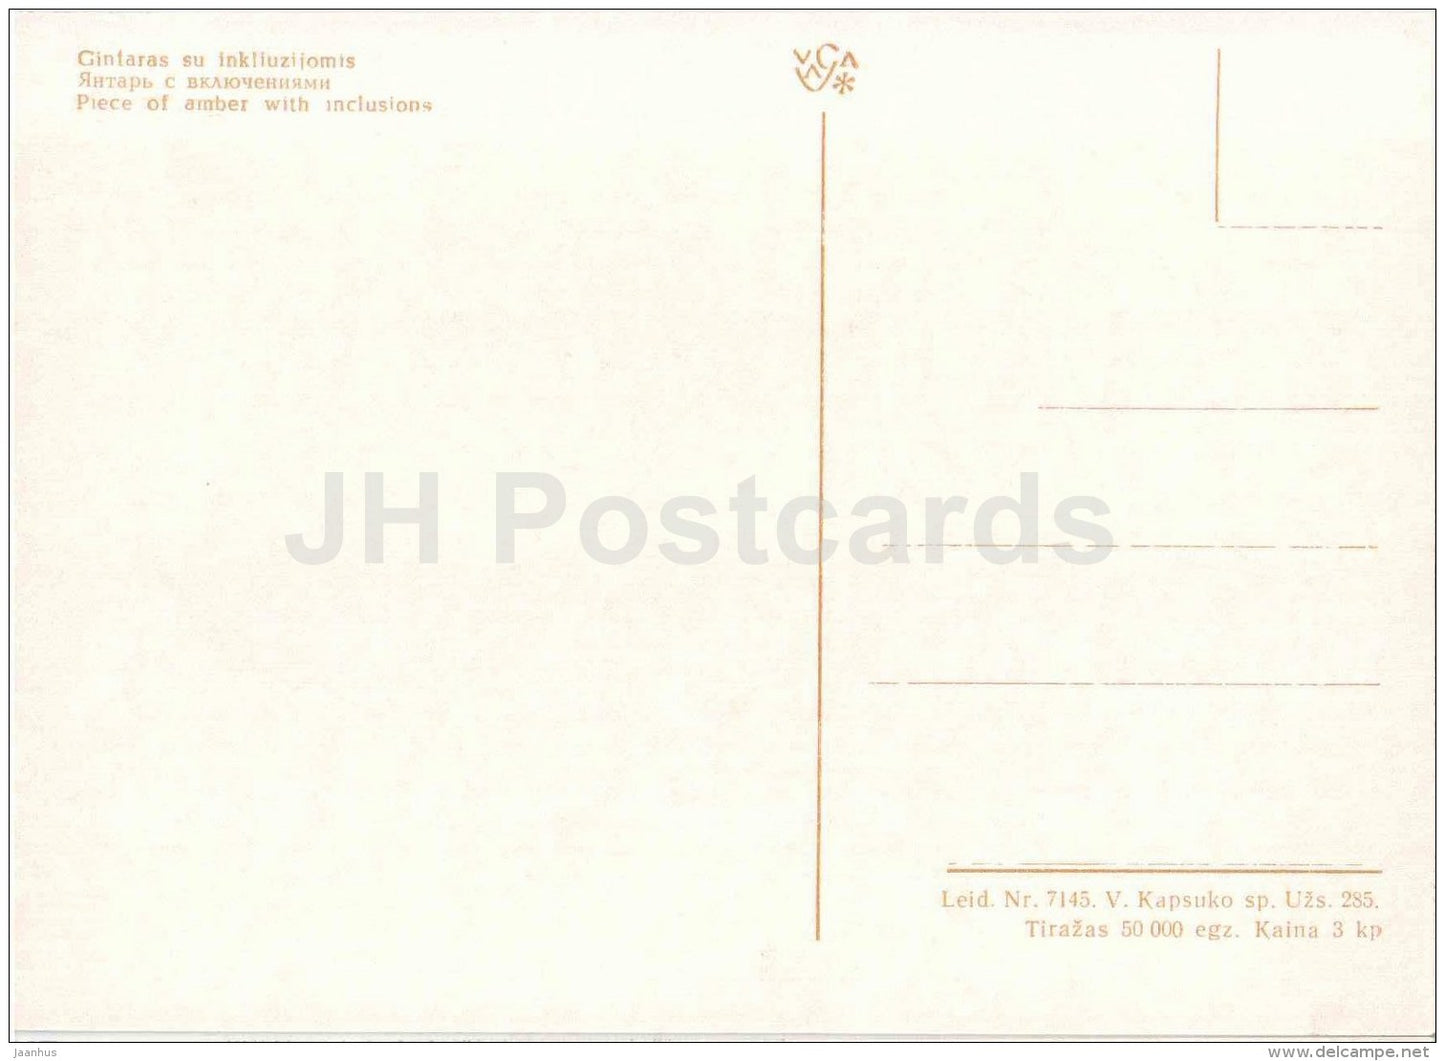 Piece of Amber with Inclusions - 3 - Amber - Gintaras - 1973 - Lithuania USSR - unused - JH Postcards